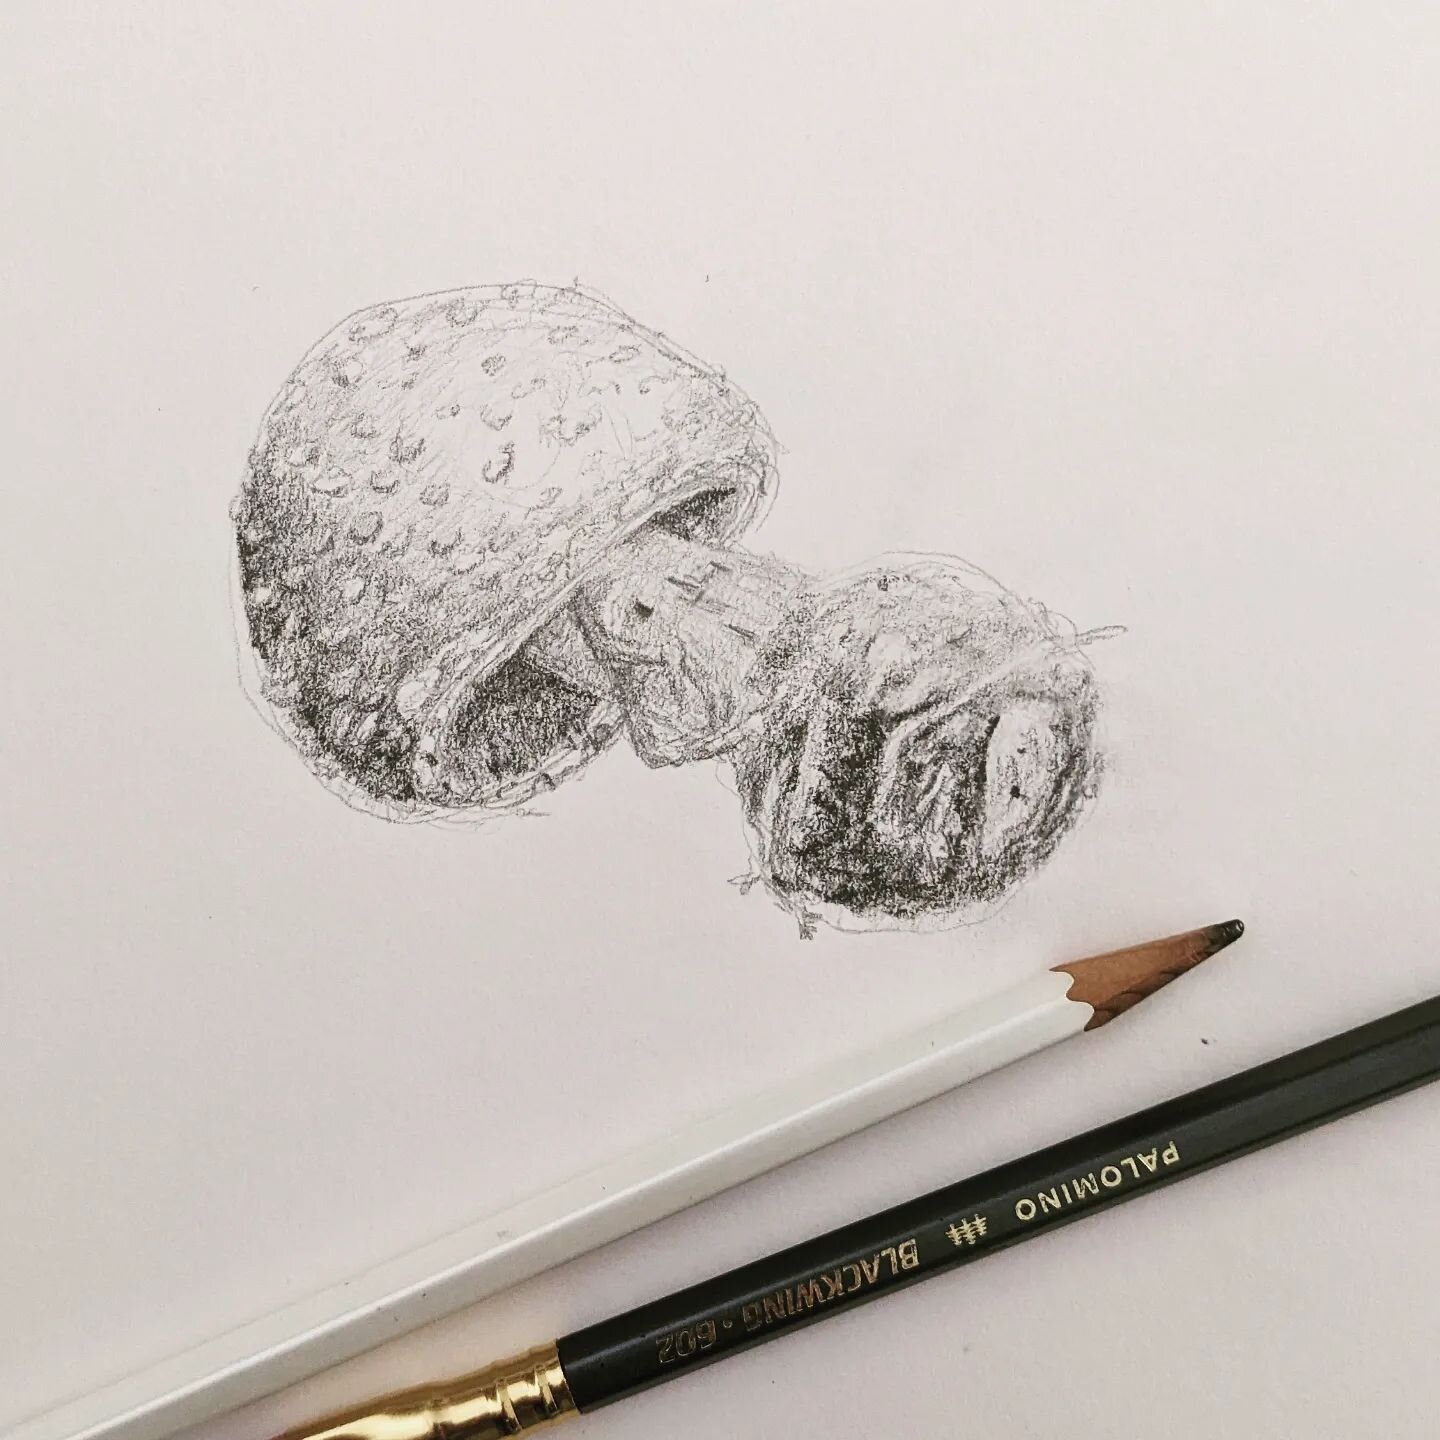 Signed up for a nature drawing class this term at Wyreena with @rachfhammond. I'm already loving the guidance and ability to set aside time to just draw.

Fungi/mushrooms are a favourite subject for learning all sorts of techniques. My mushroom began